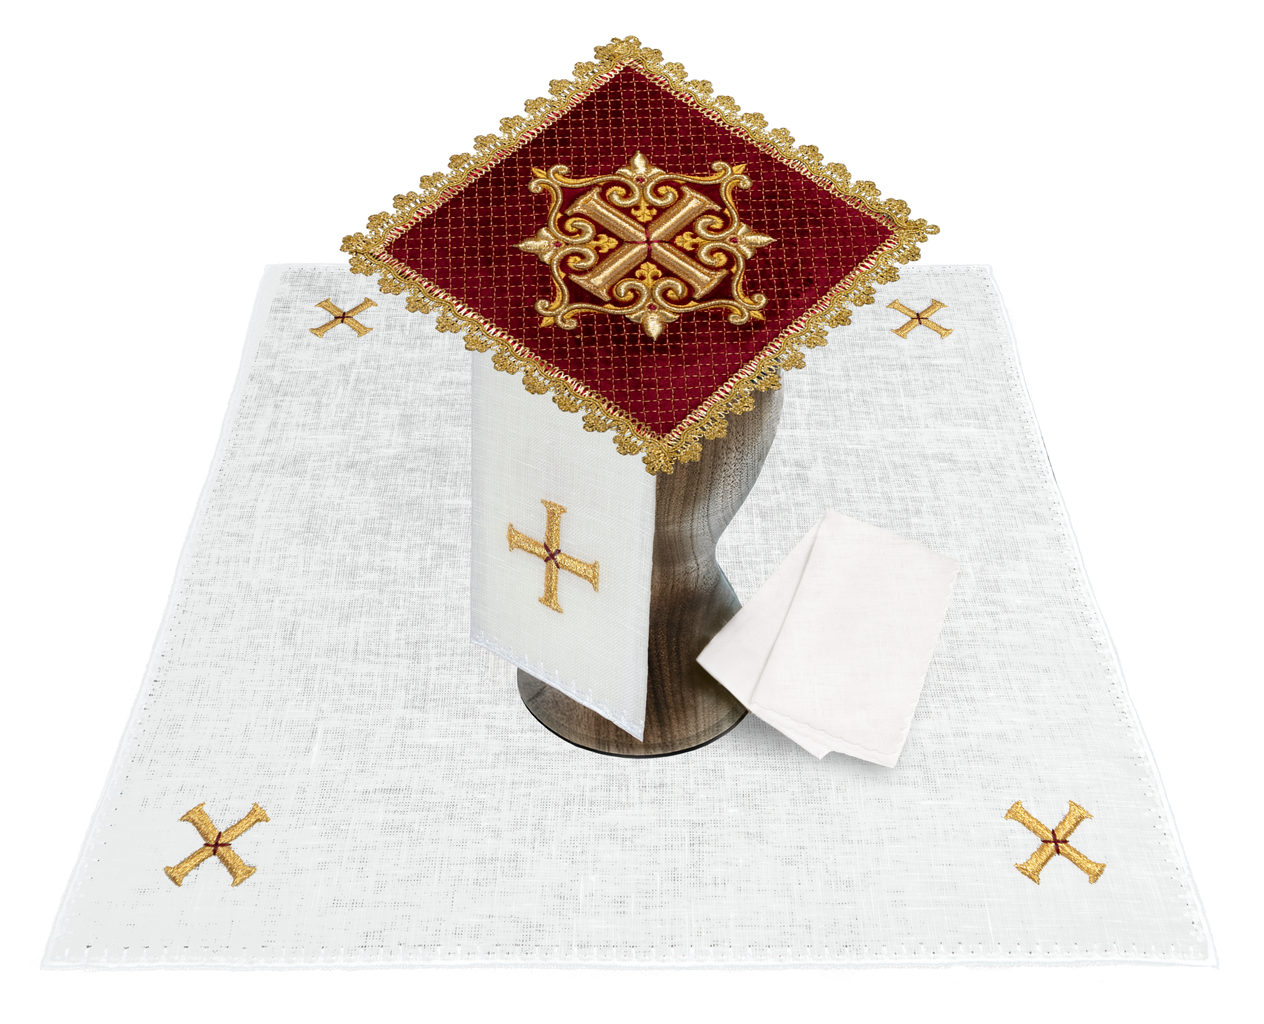 Altar linen set made of red velvet with gold cross embroidery